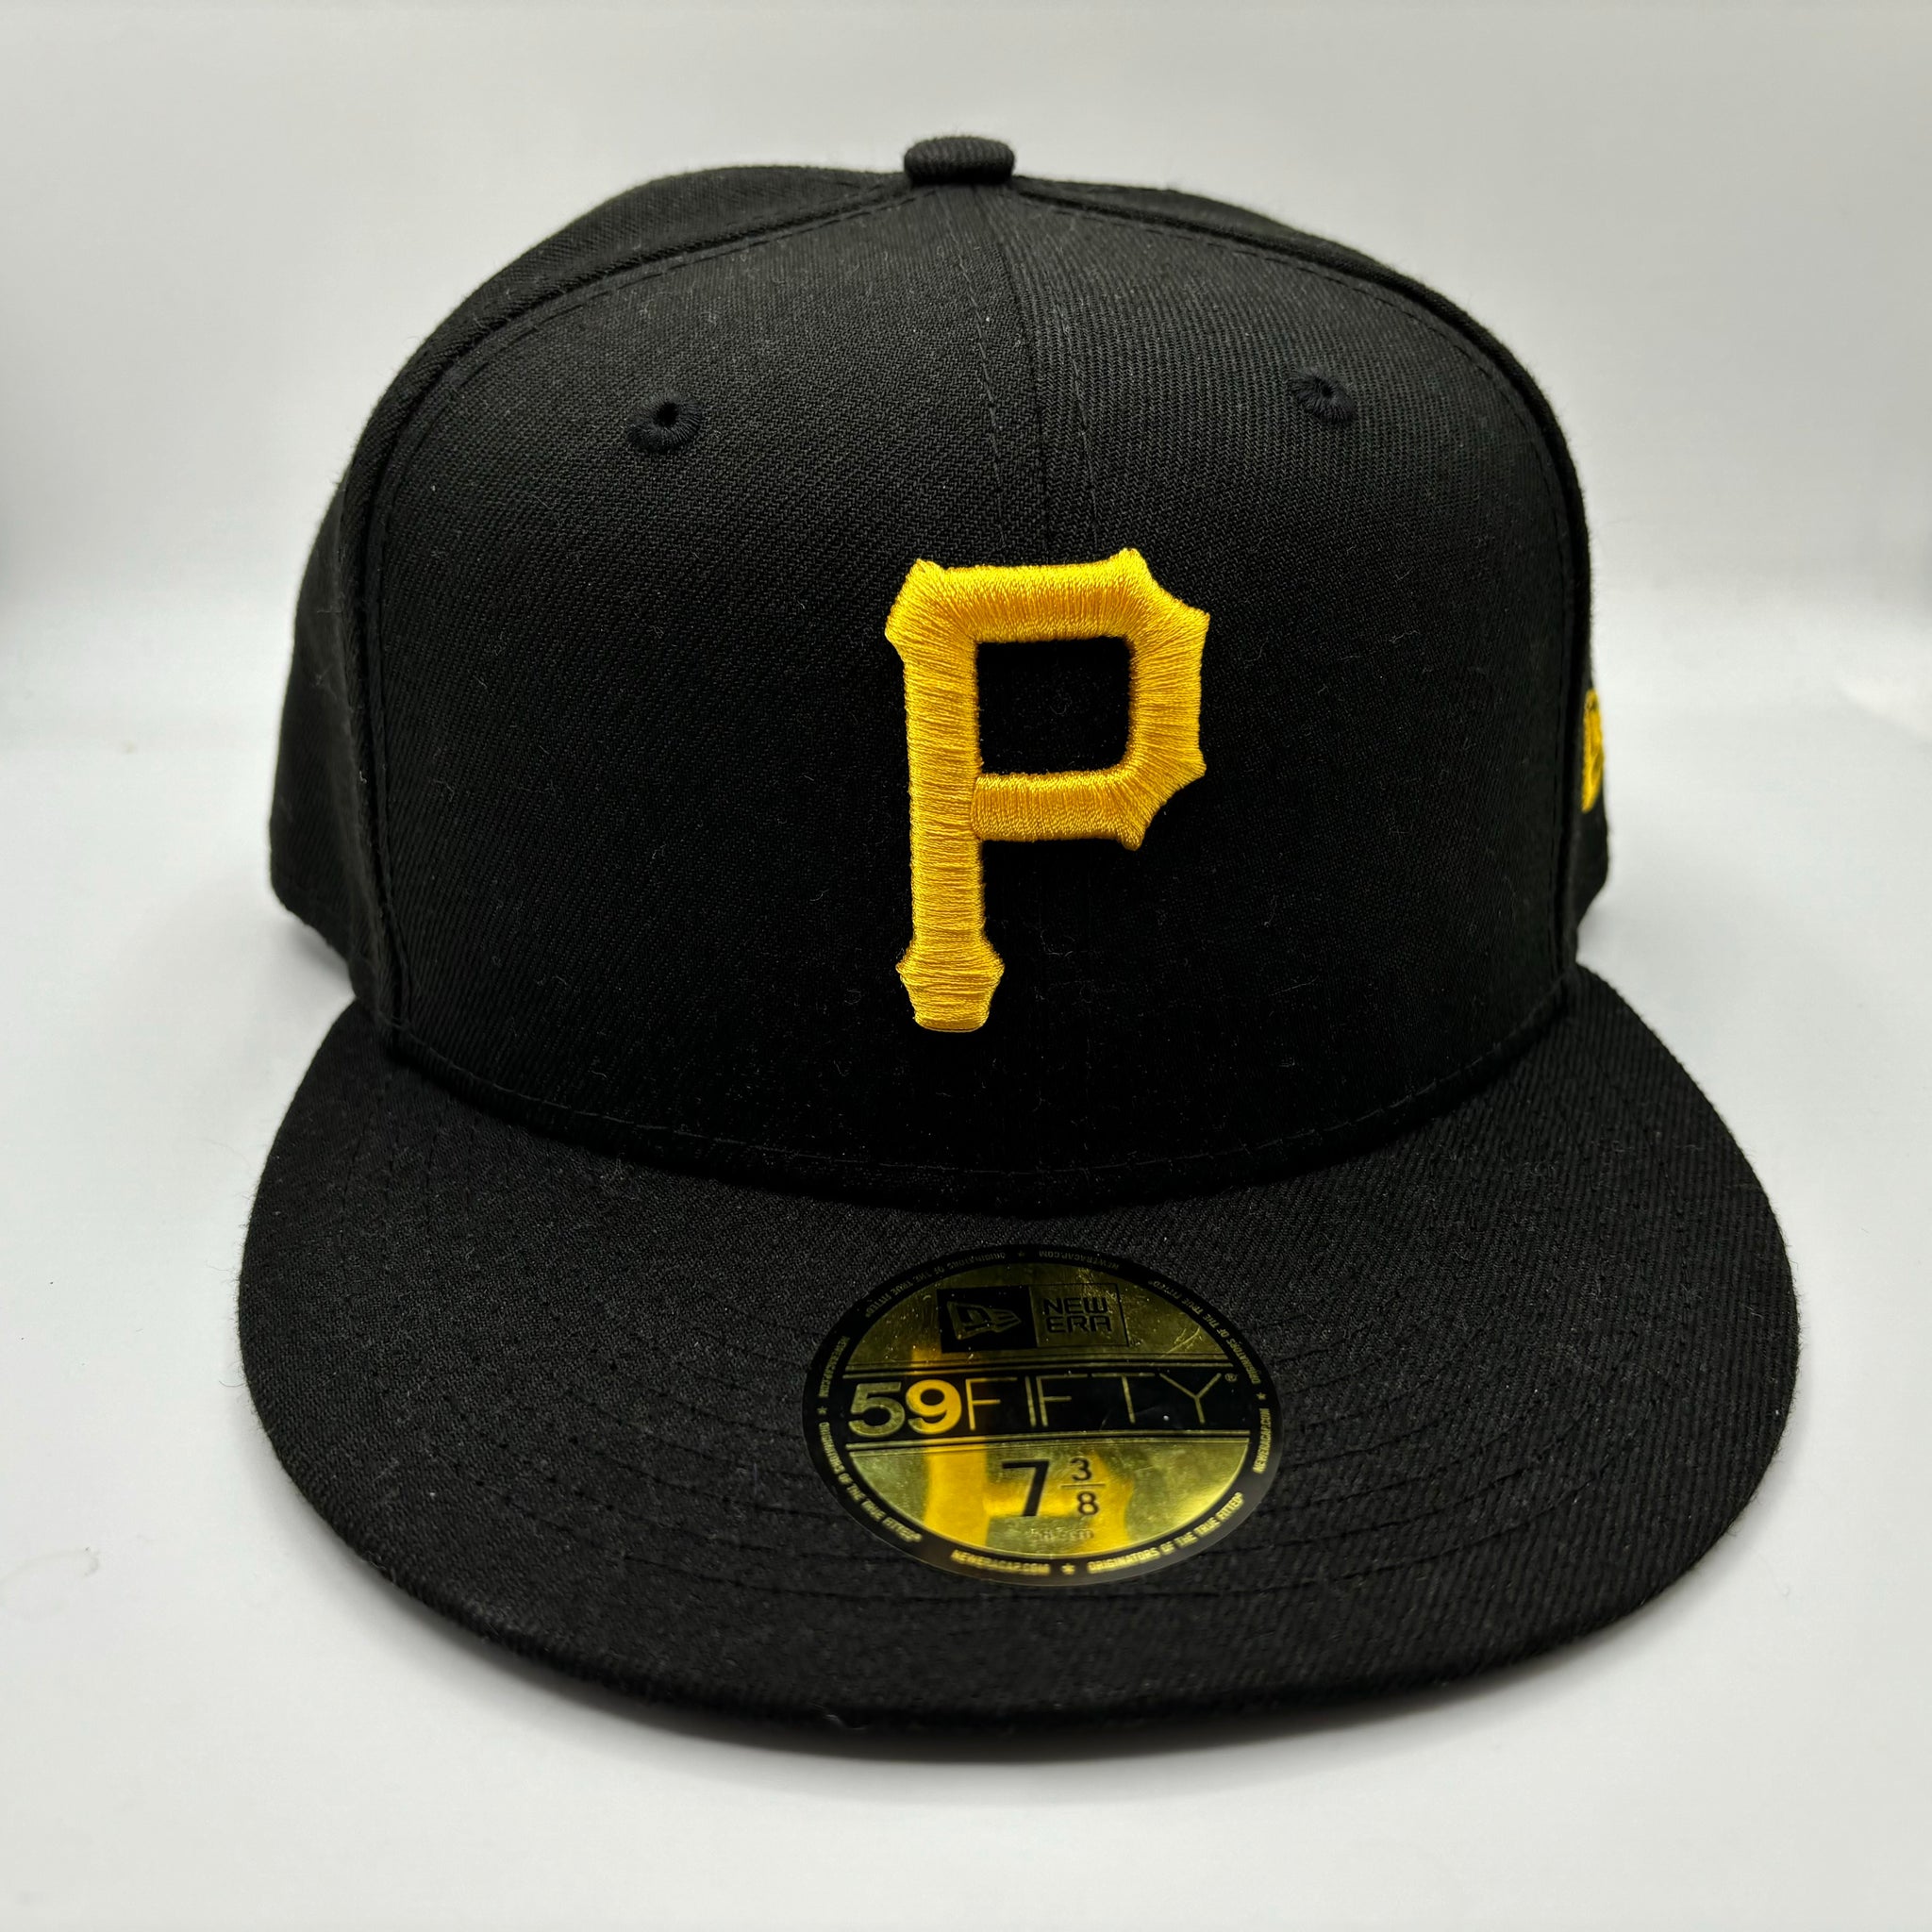 Pittsburgh Pirates Performance 59fifty Fitted Hat